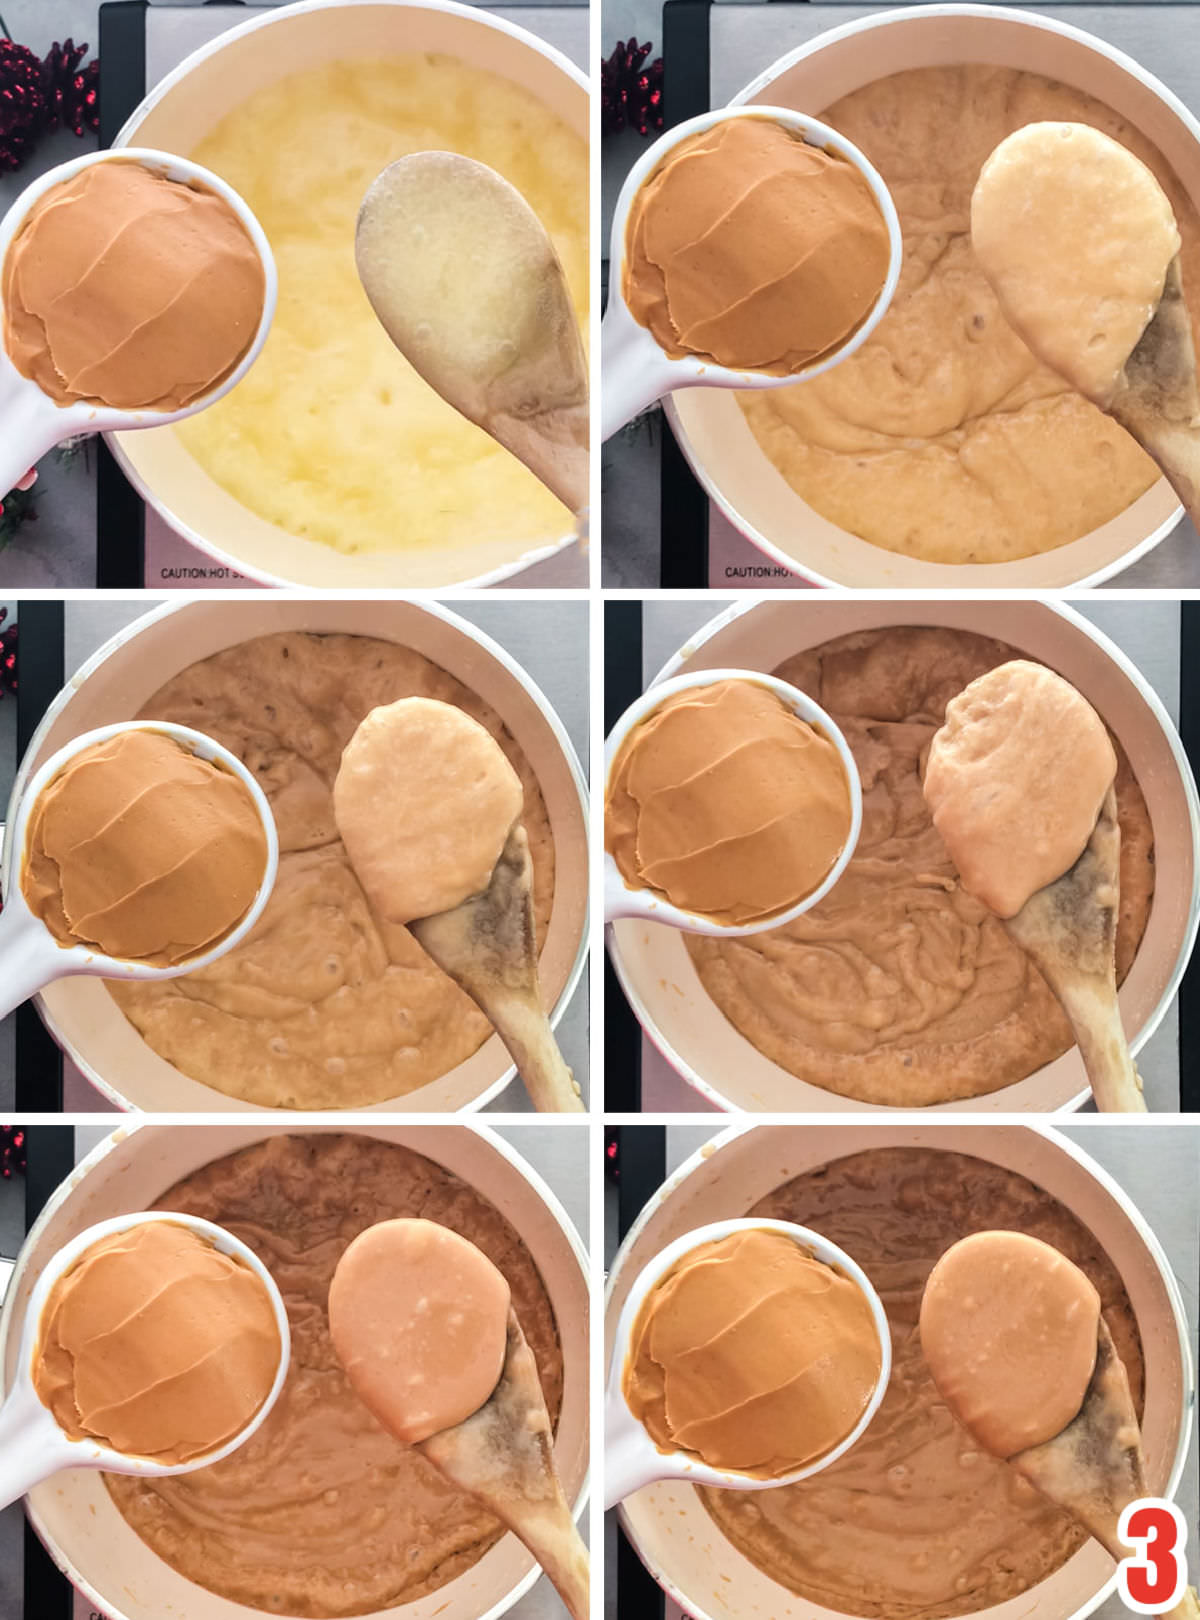 Collage image showing the toffee mixture at various stages in the cookie process to show that it will become of the color of peanut butter when it is finished cooking.